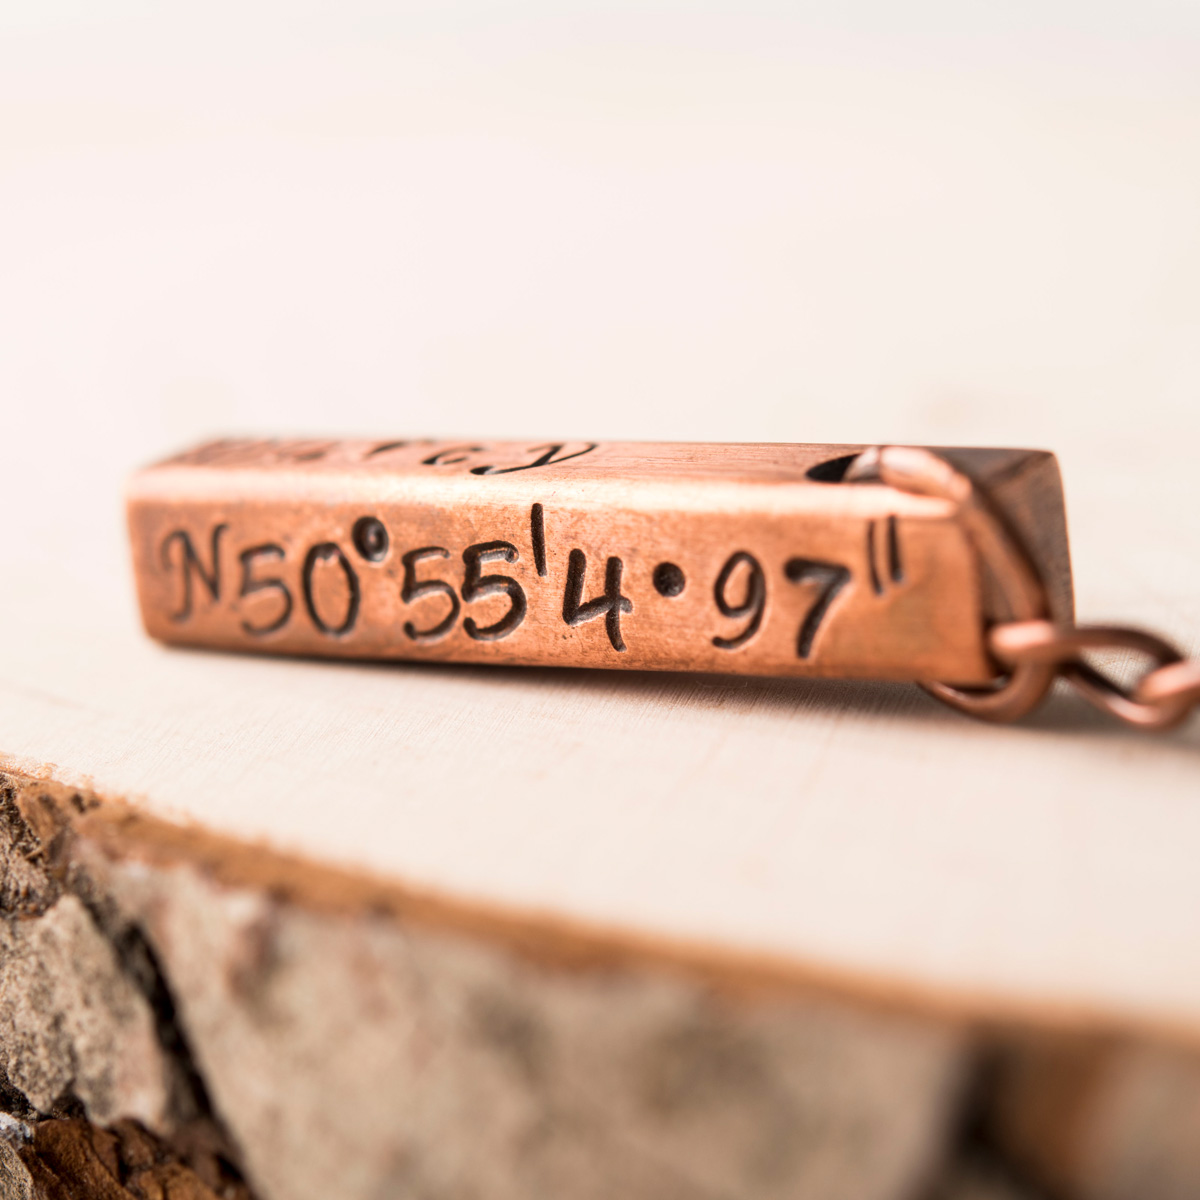 Personalised Copper Bar Key Ring